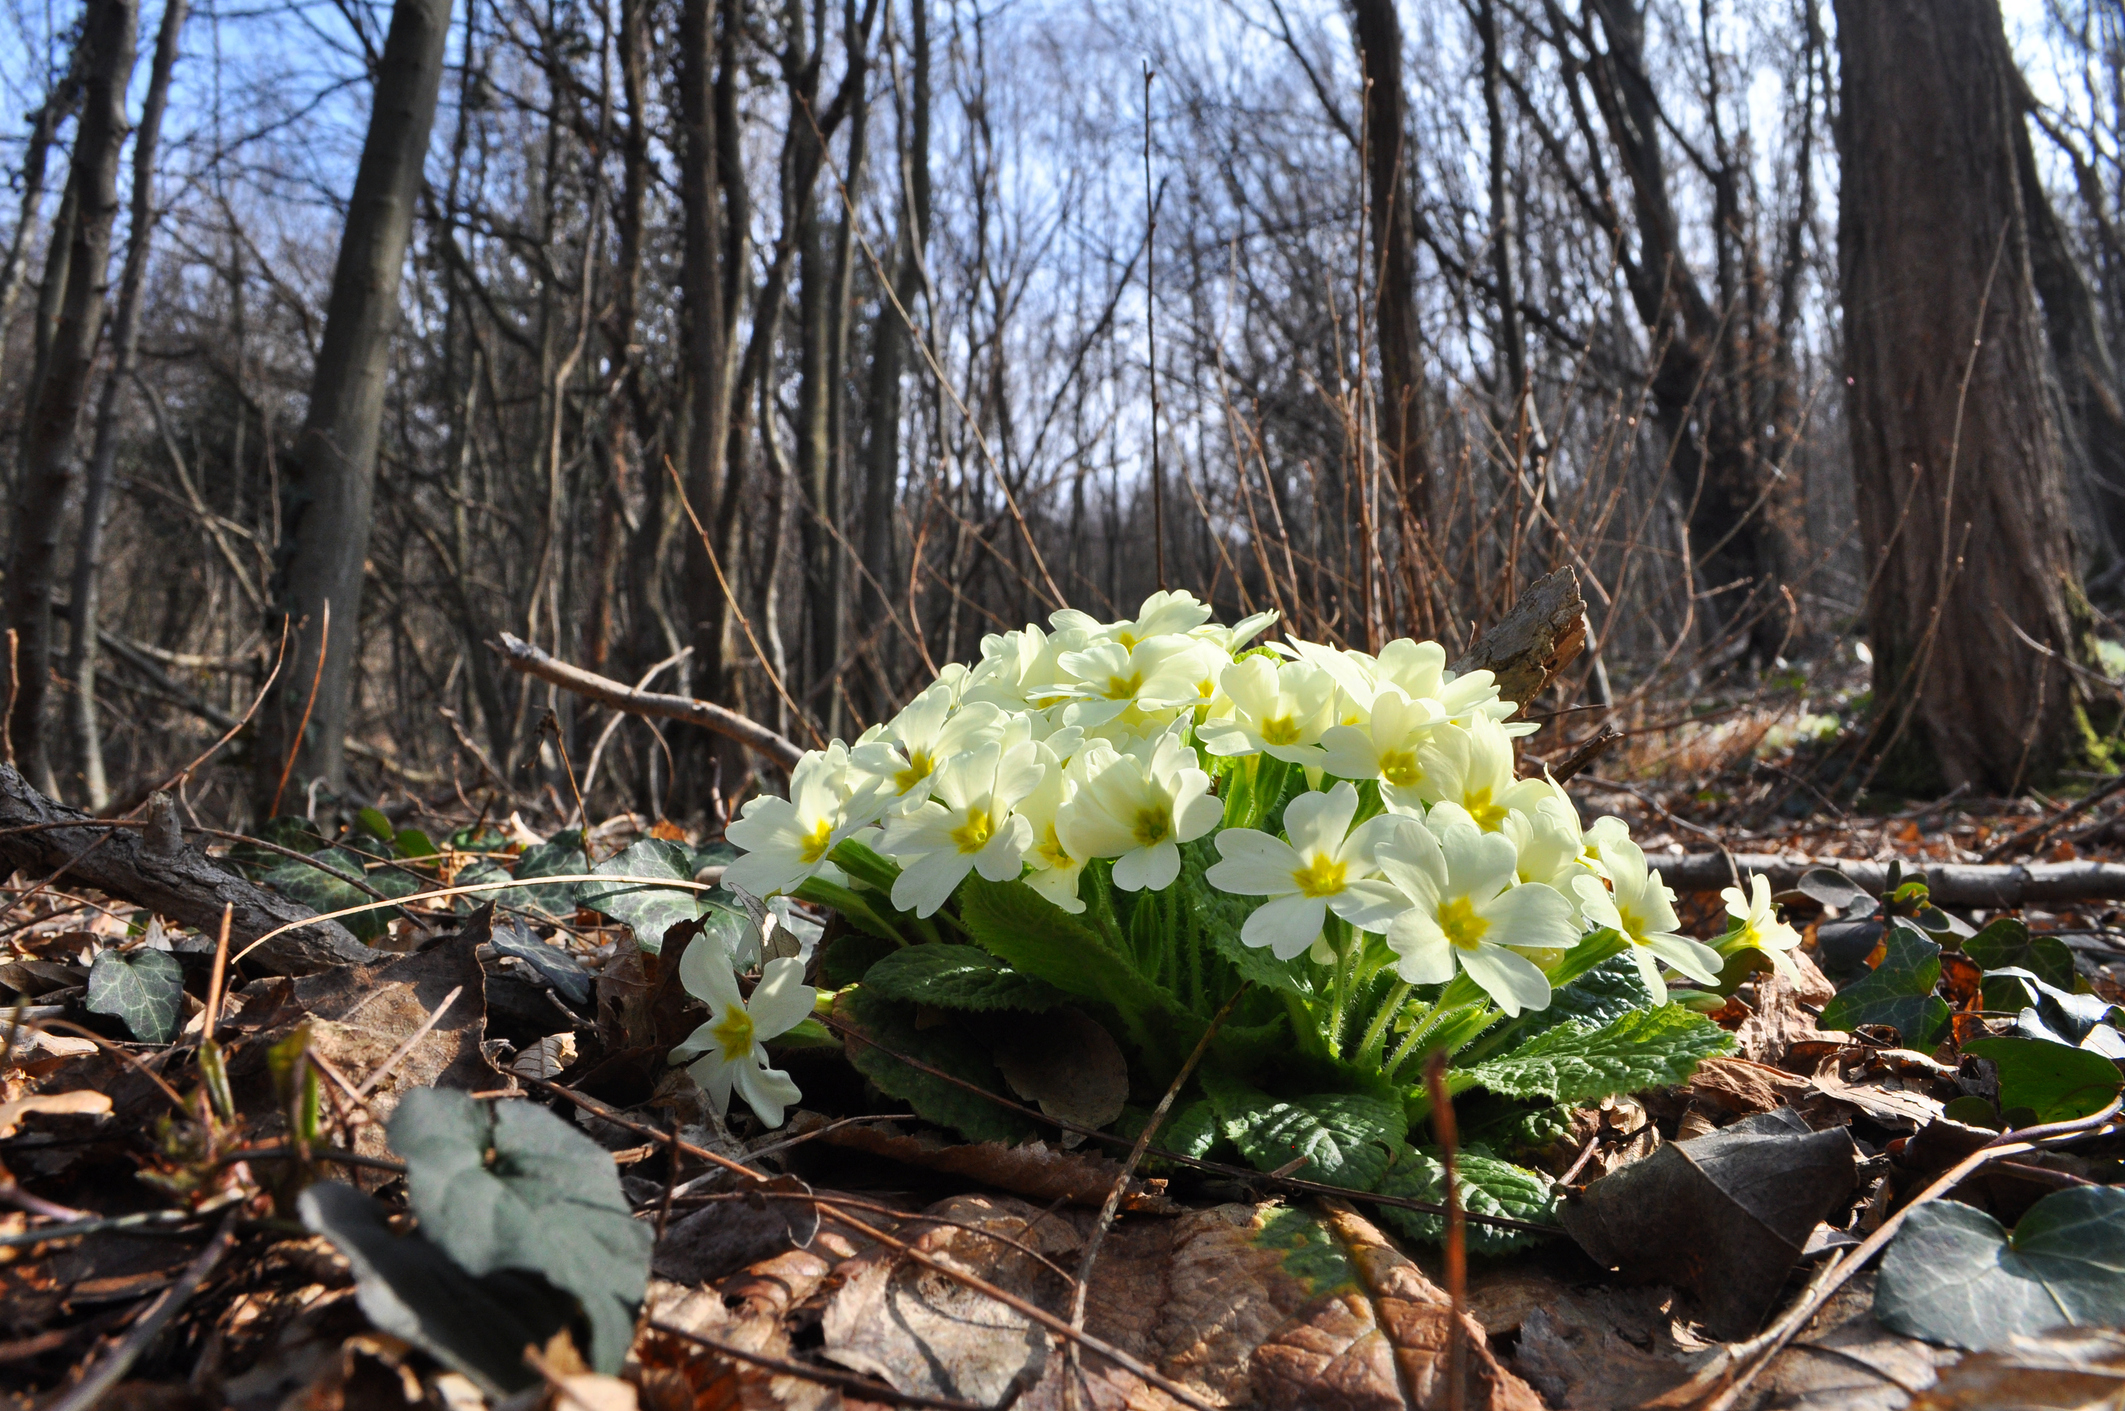 Primroses do well as a woodland garden plant. Their bloom time is early spring through late spring and they are suited to boggy conditions. Use them as groundcovers and early season bloom.